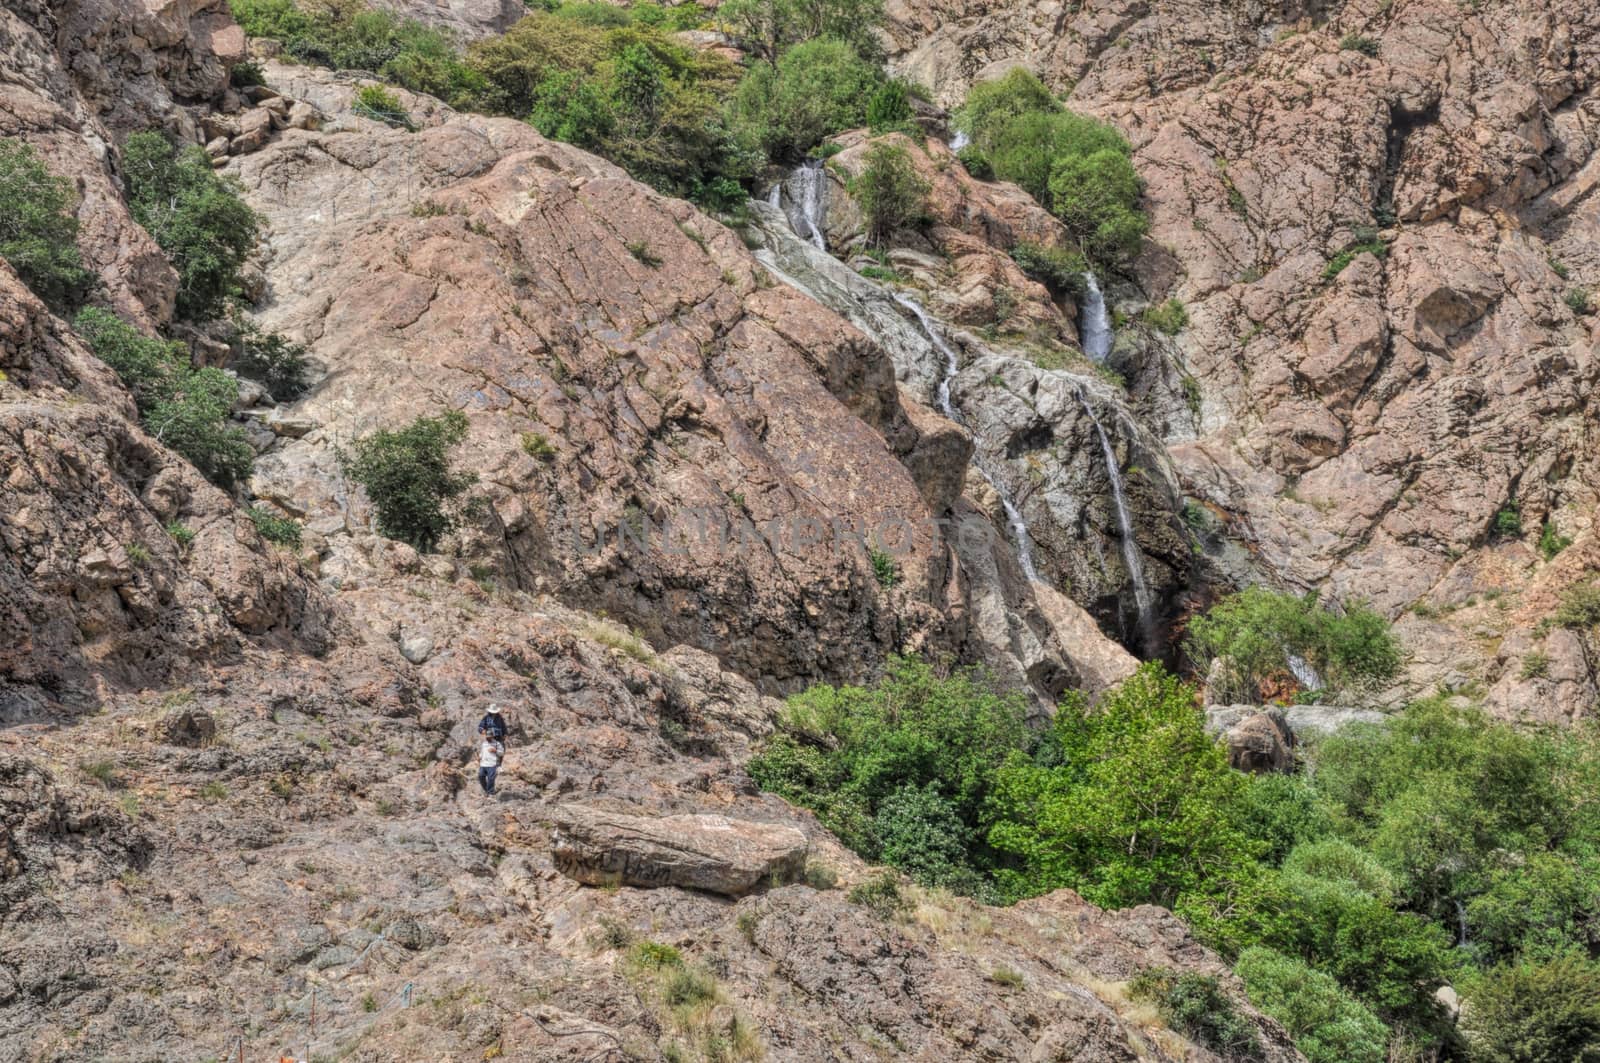 Water cascading down the scenic rocky slopes in Tochal, Iran